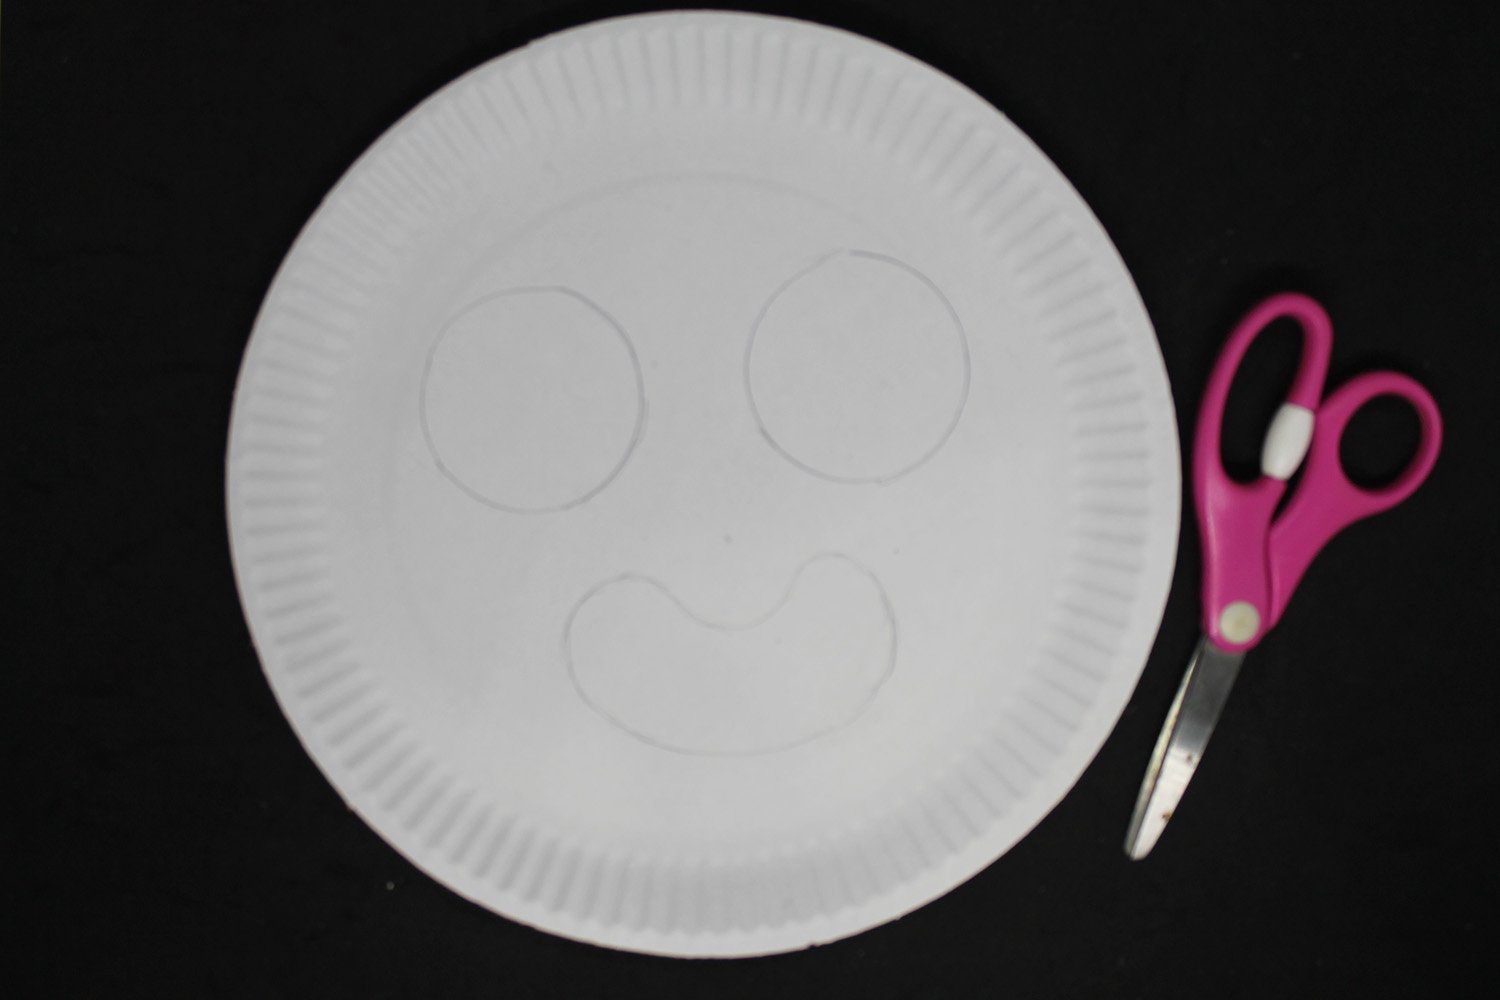 How to Make a Paper Plate Monster - Step 16